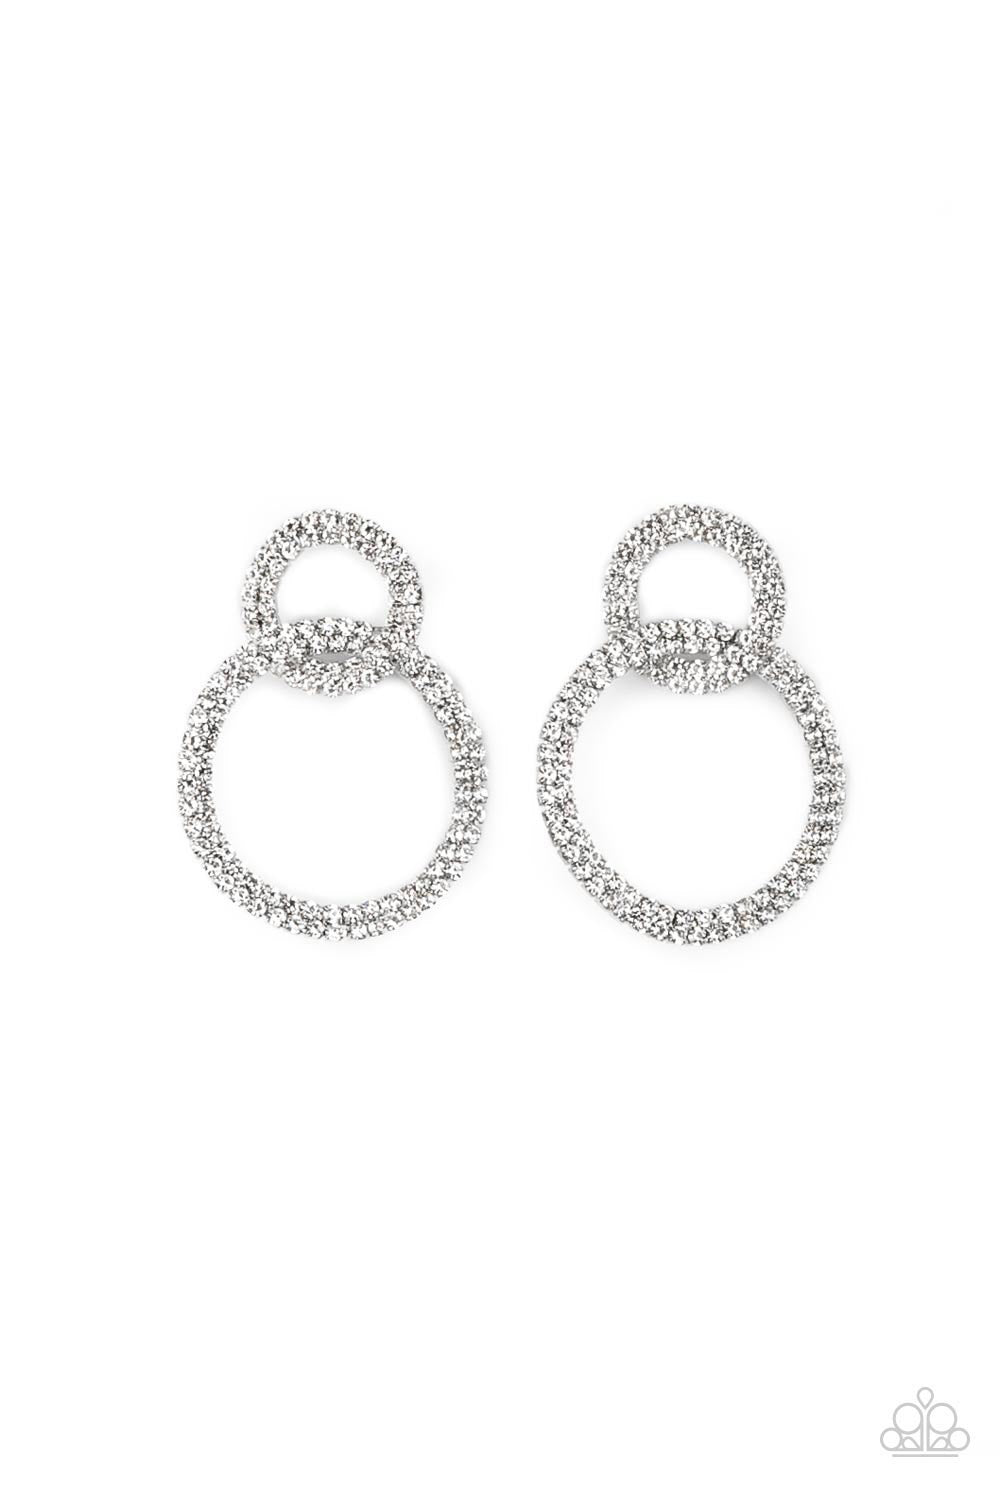 Rows of sparkly white rhinestones encircle into two interconnected hoops, creating a jaw-dropping lure